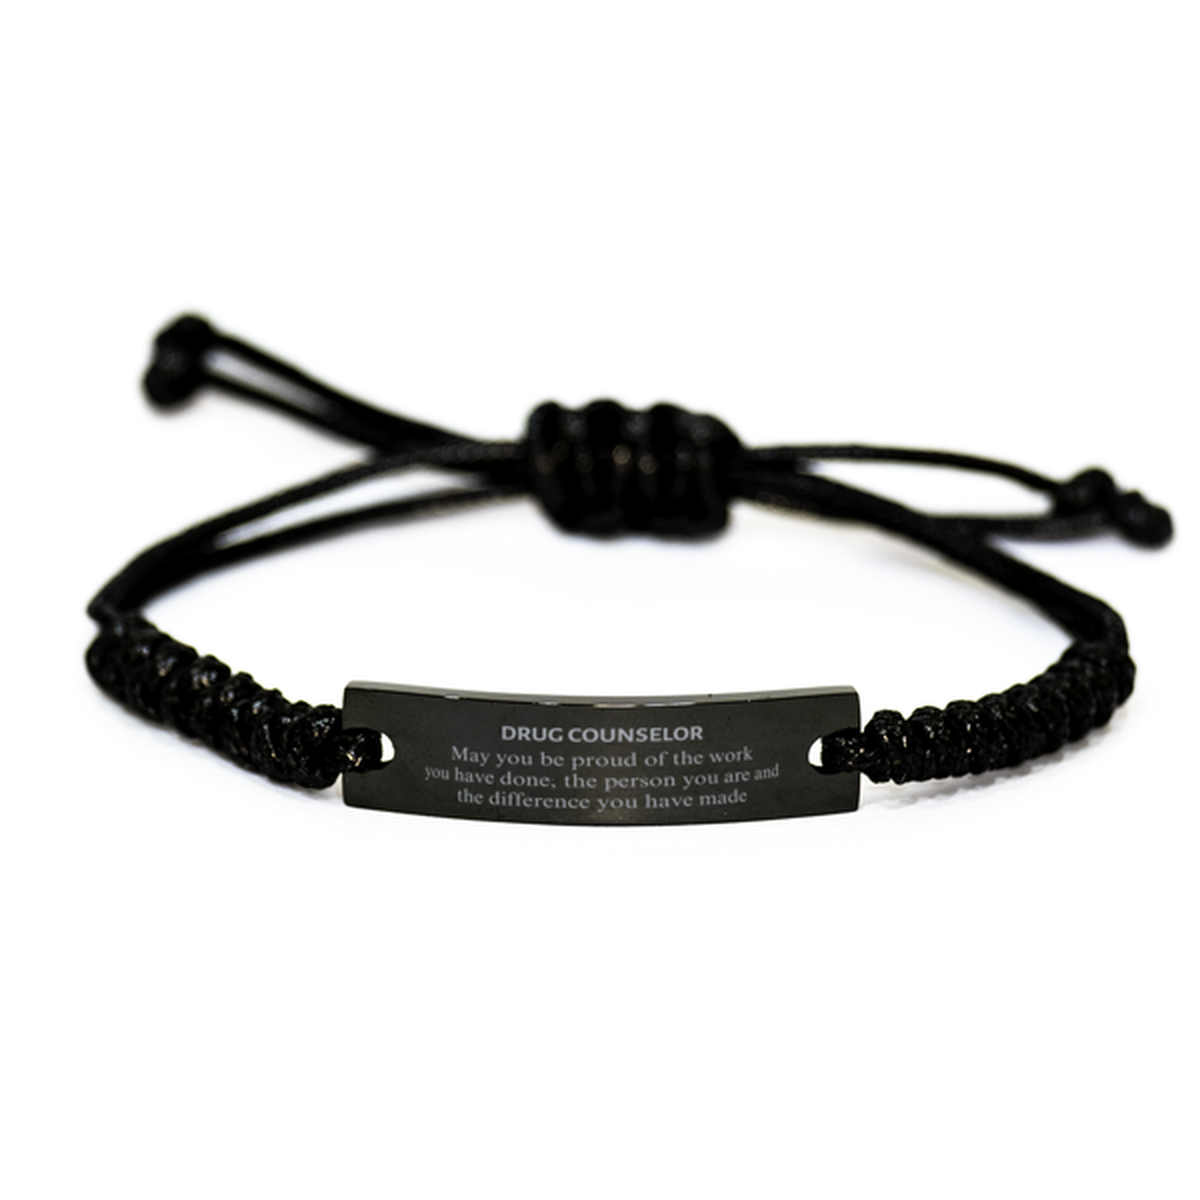 Drug Counselor May you be proud of the work you have done, Retirement Drug Counselor Black Rope Bracelet for Colleague Appreciation Gifts Amazing for Drug Counselor